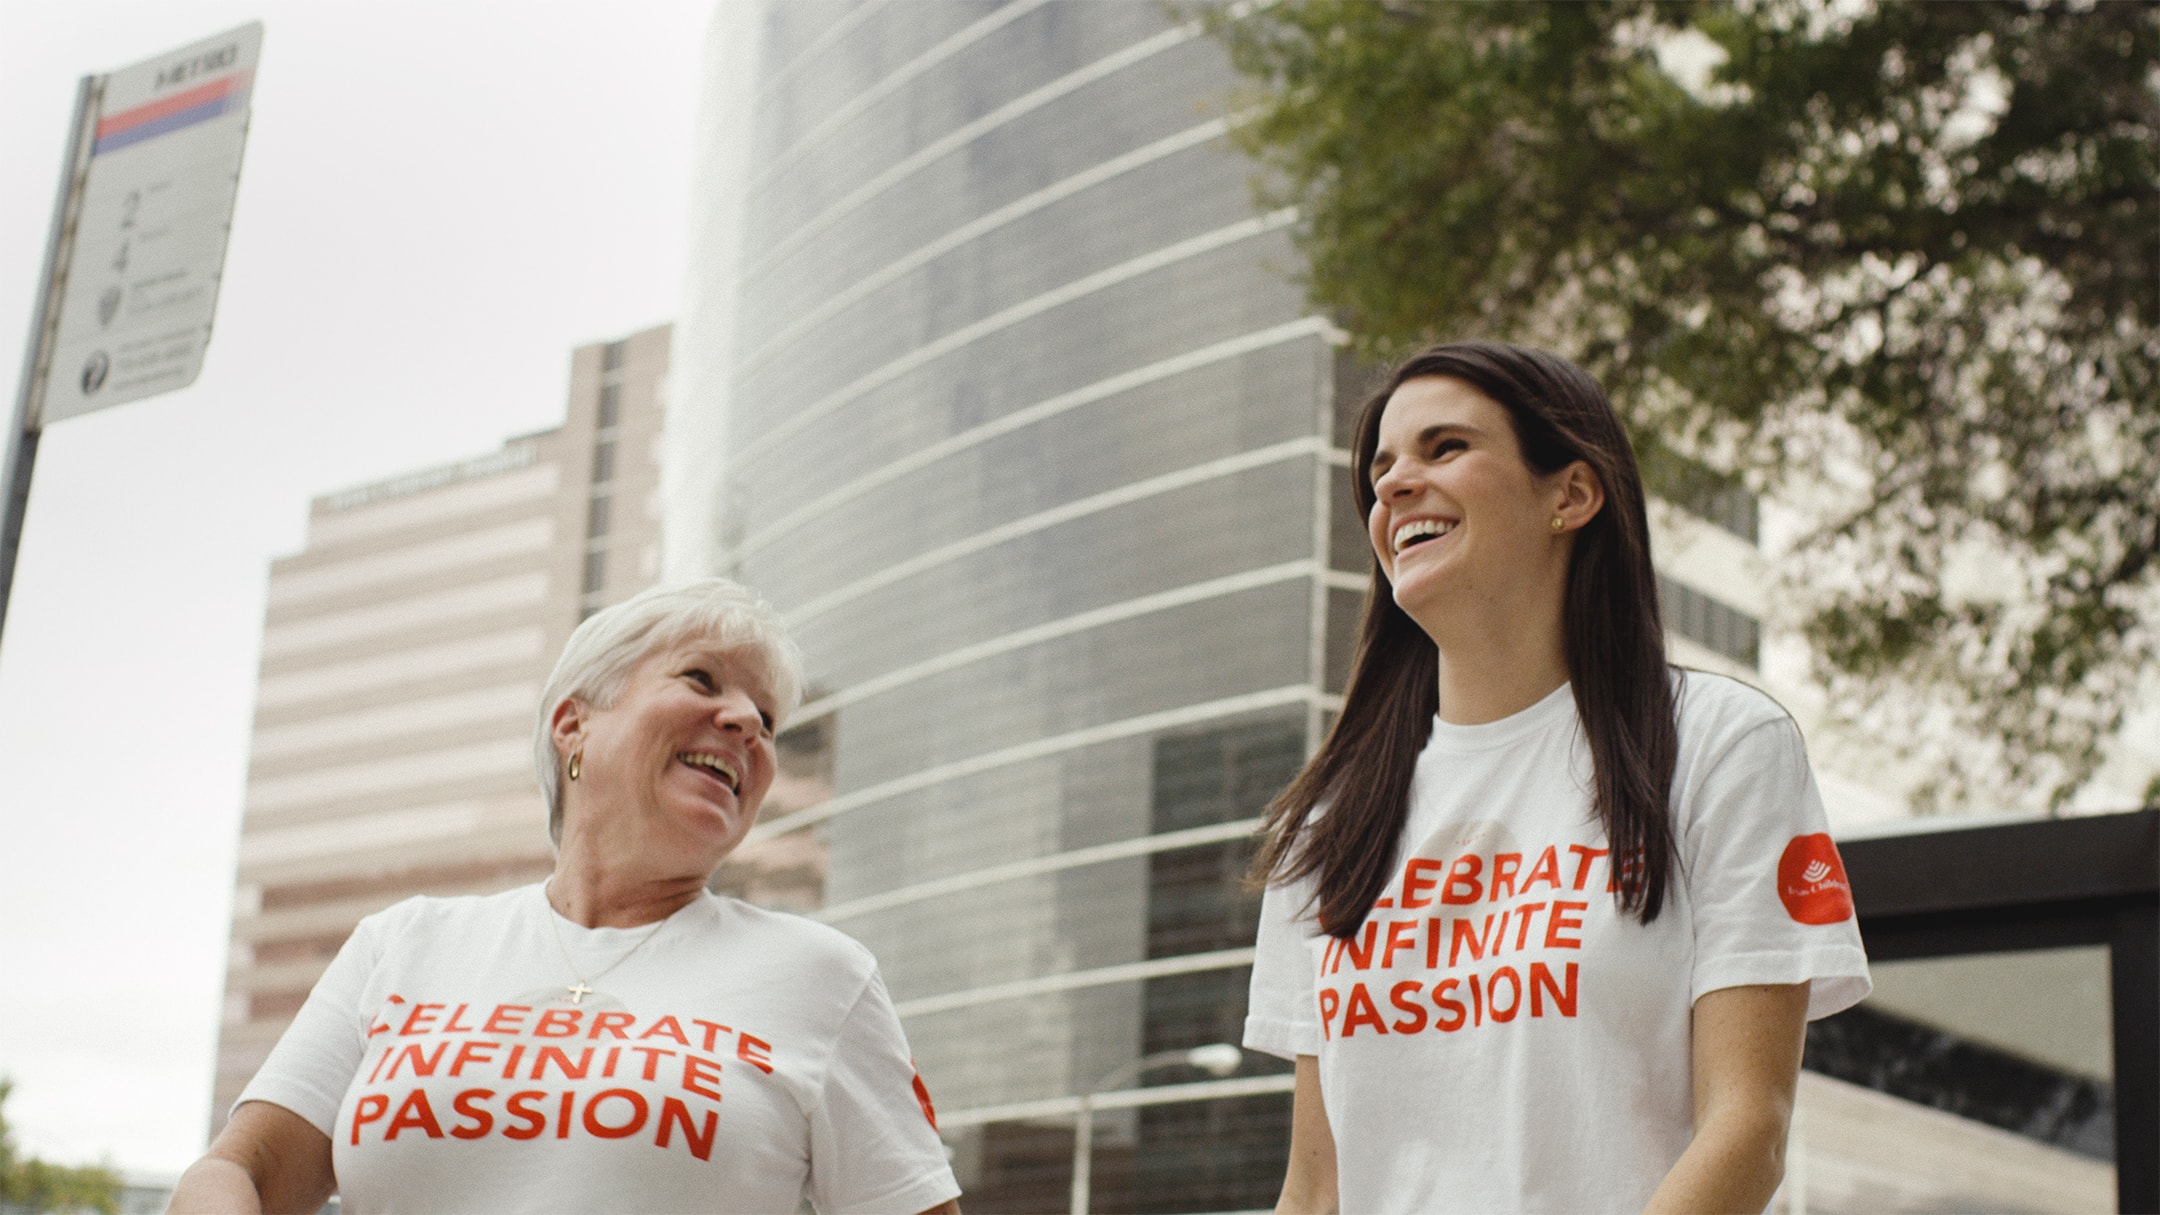 Two Texas Children's Hospital employees smiling in a culture tshirt. Part of an internal hospital branding effort for Texas Children's hospital.